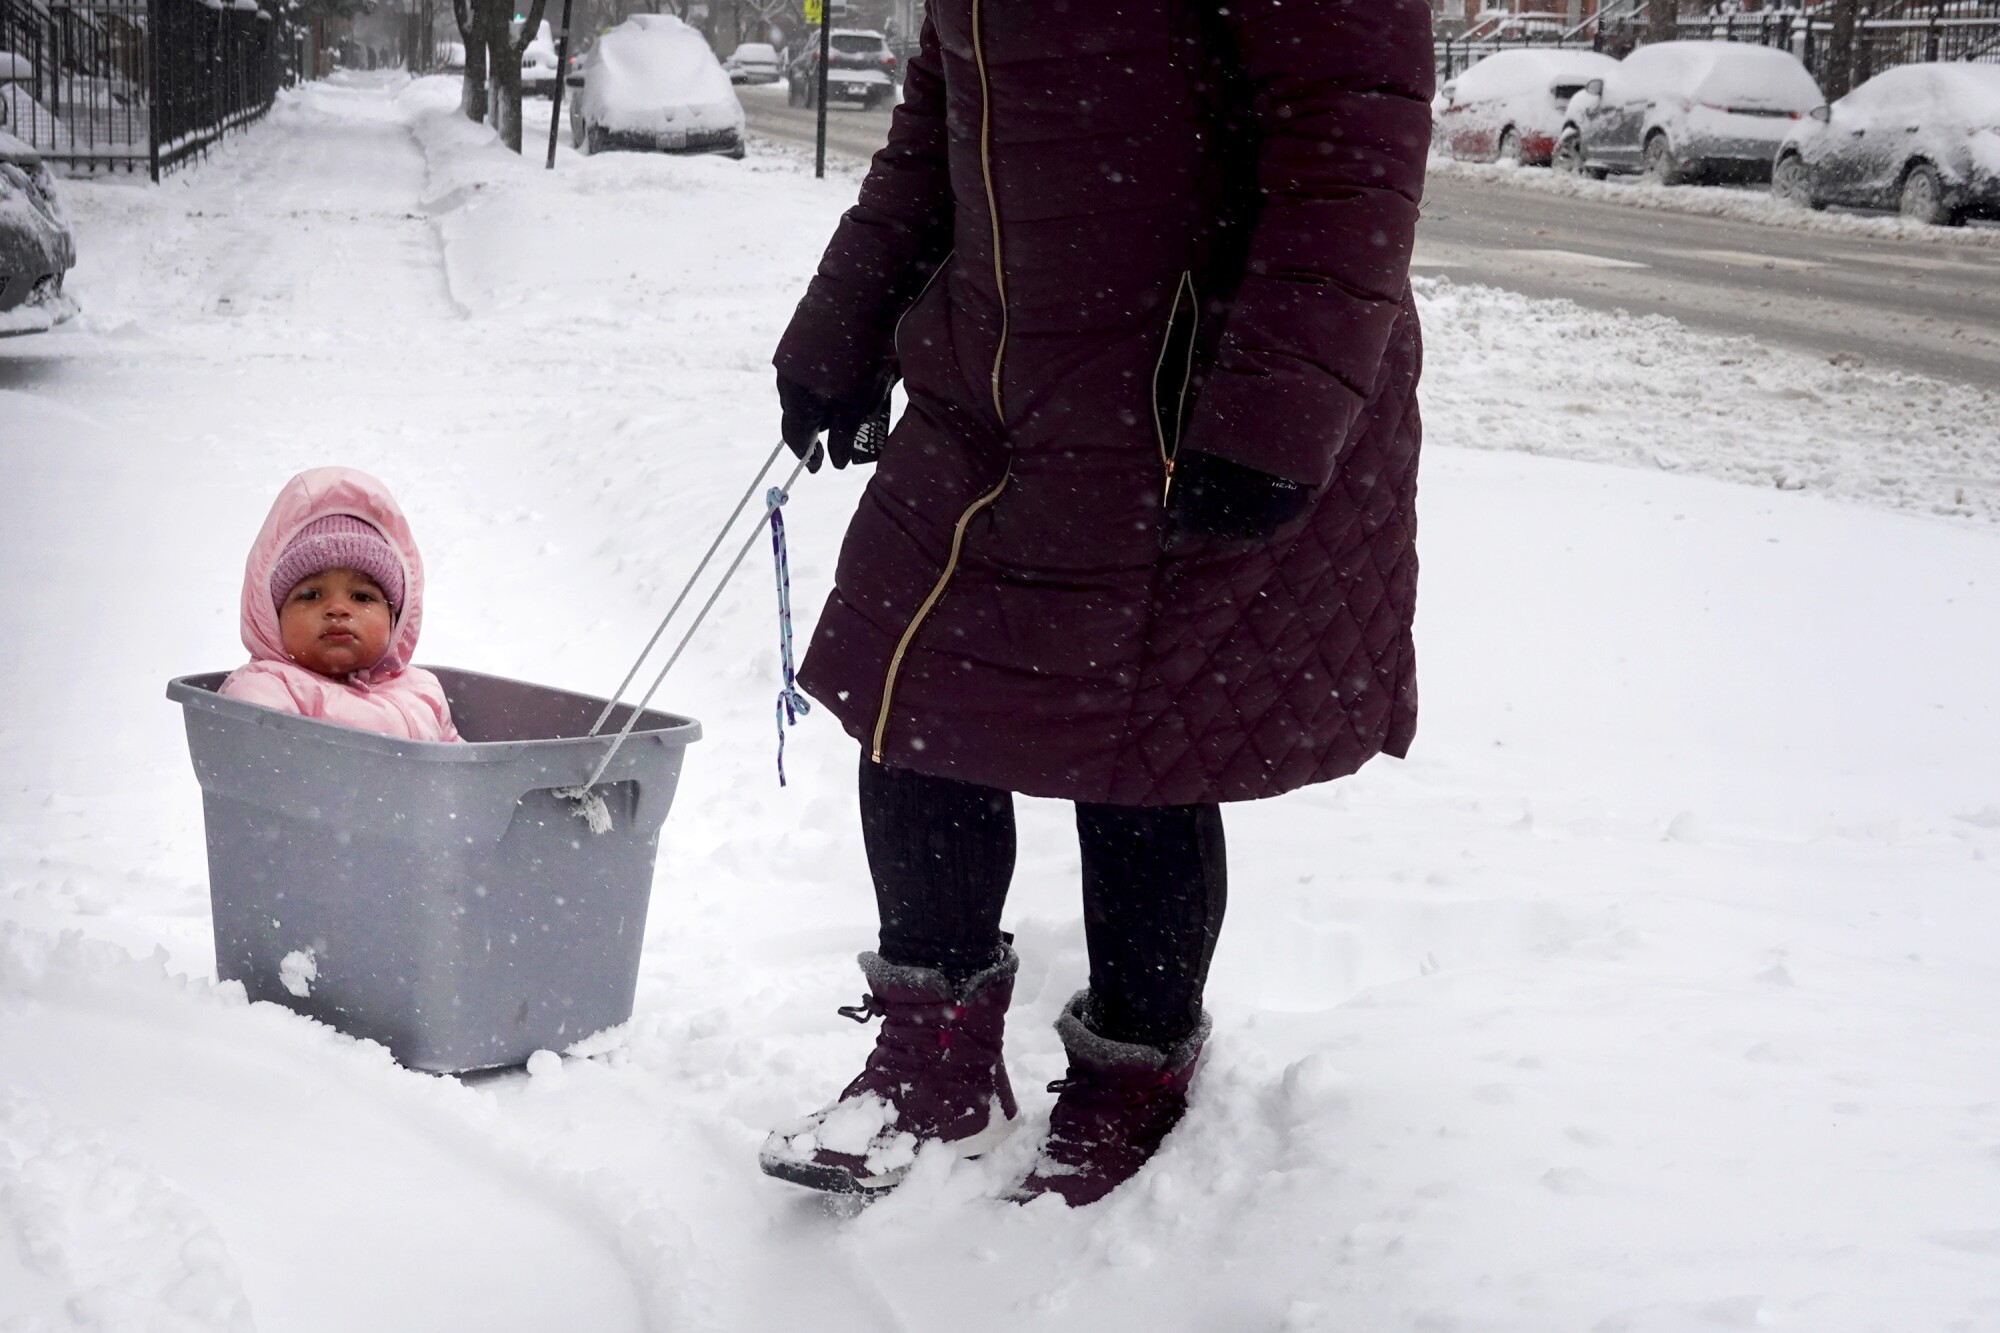 Olia is taken on a tour of her snow-covered neighborhood by her nanny on February 02, 2022 in Chicago, Illinois.